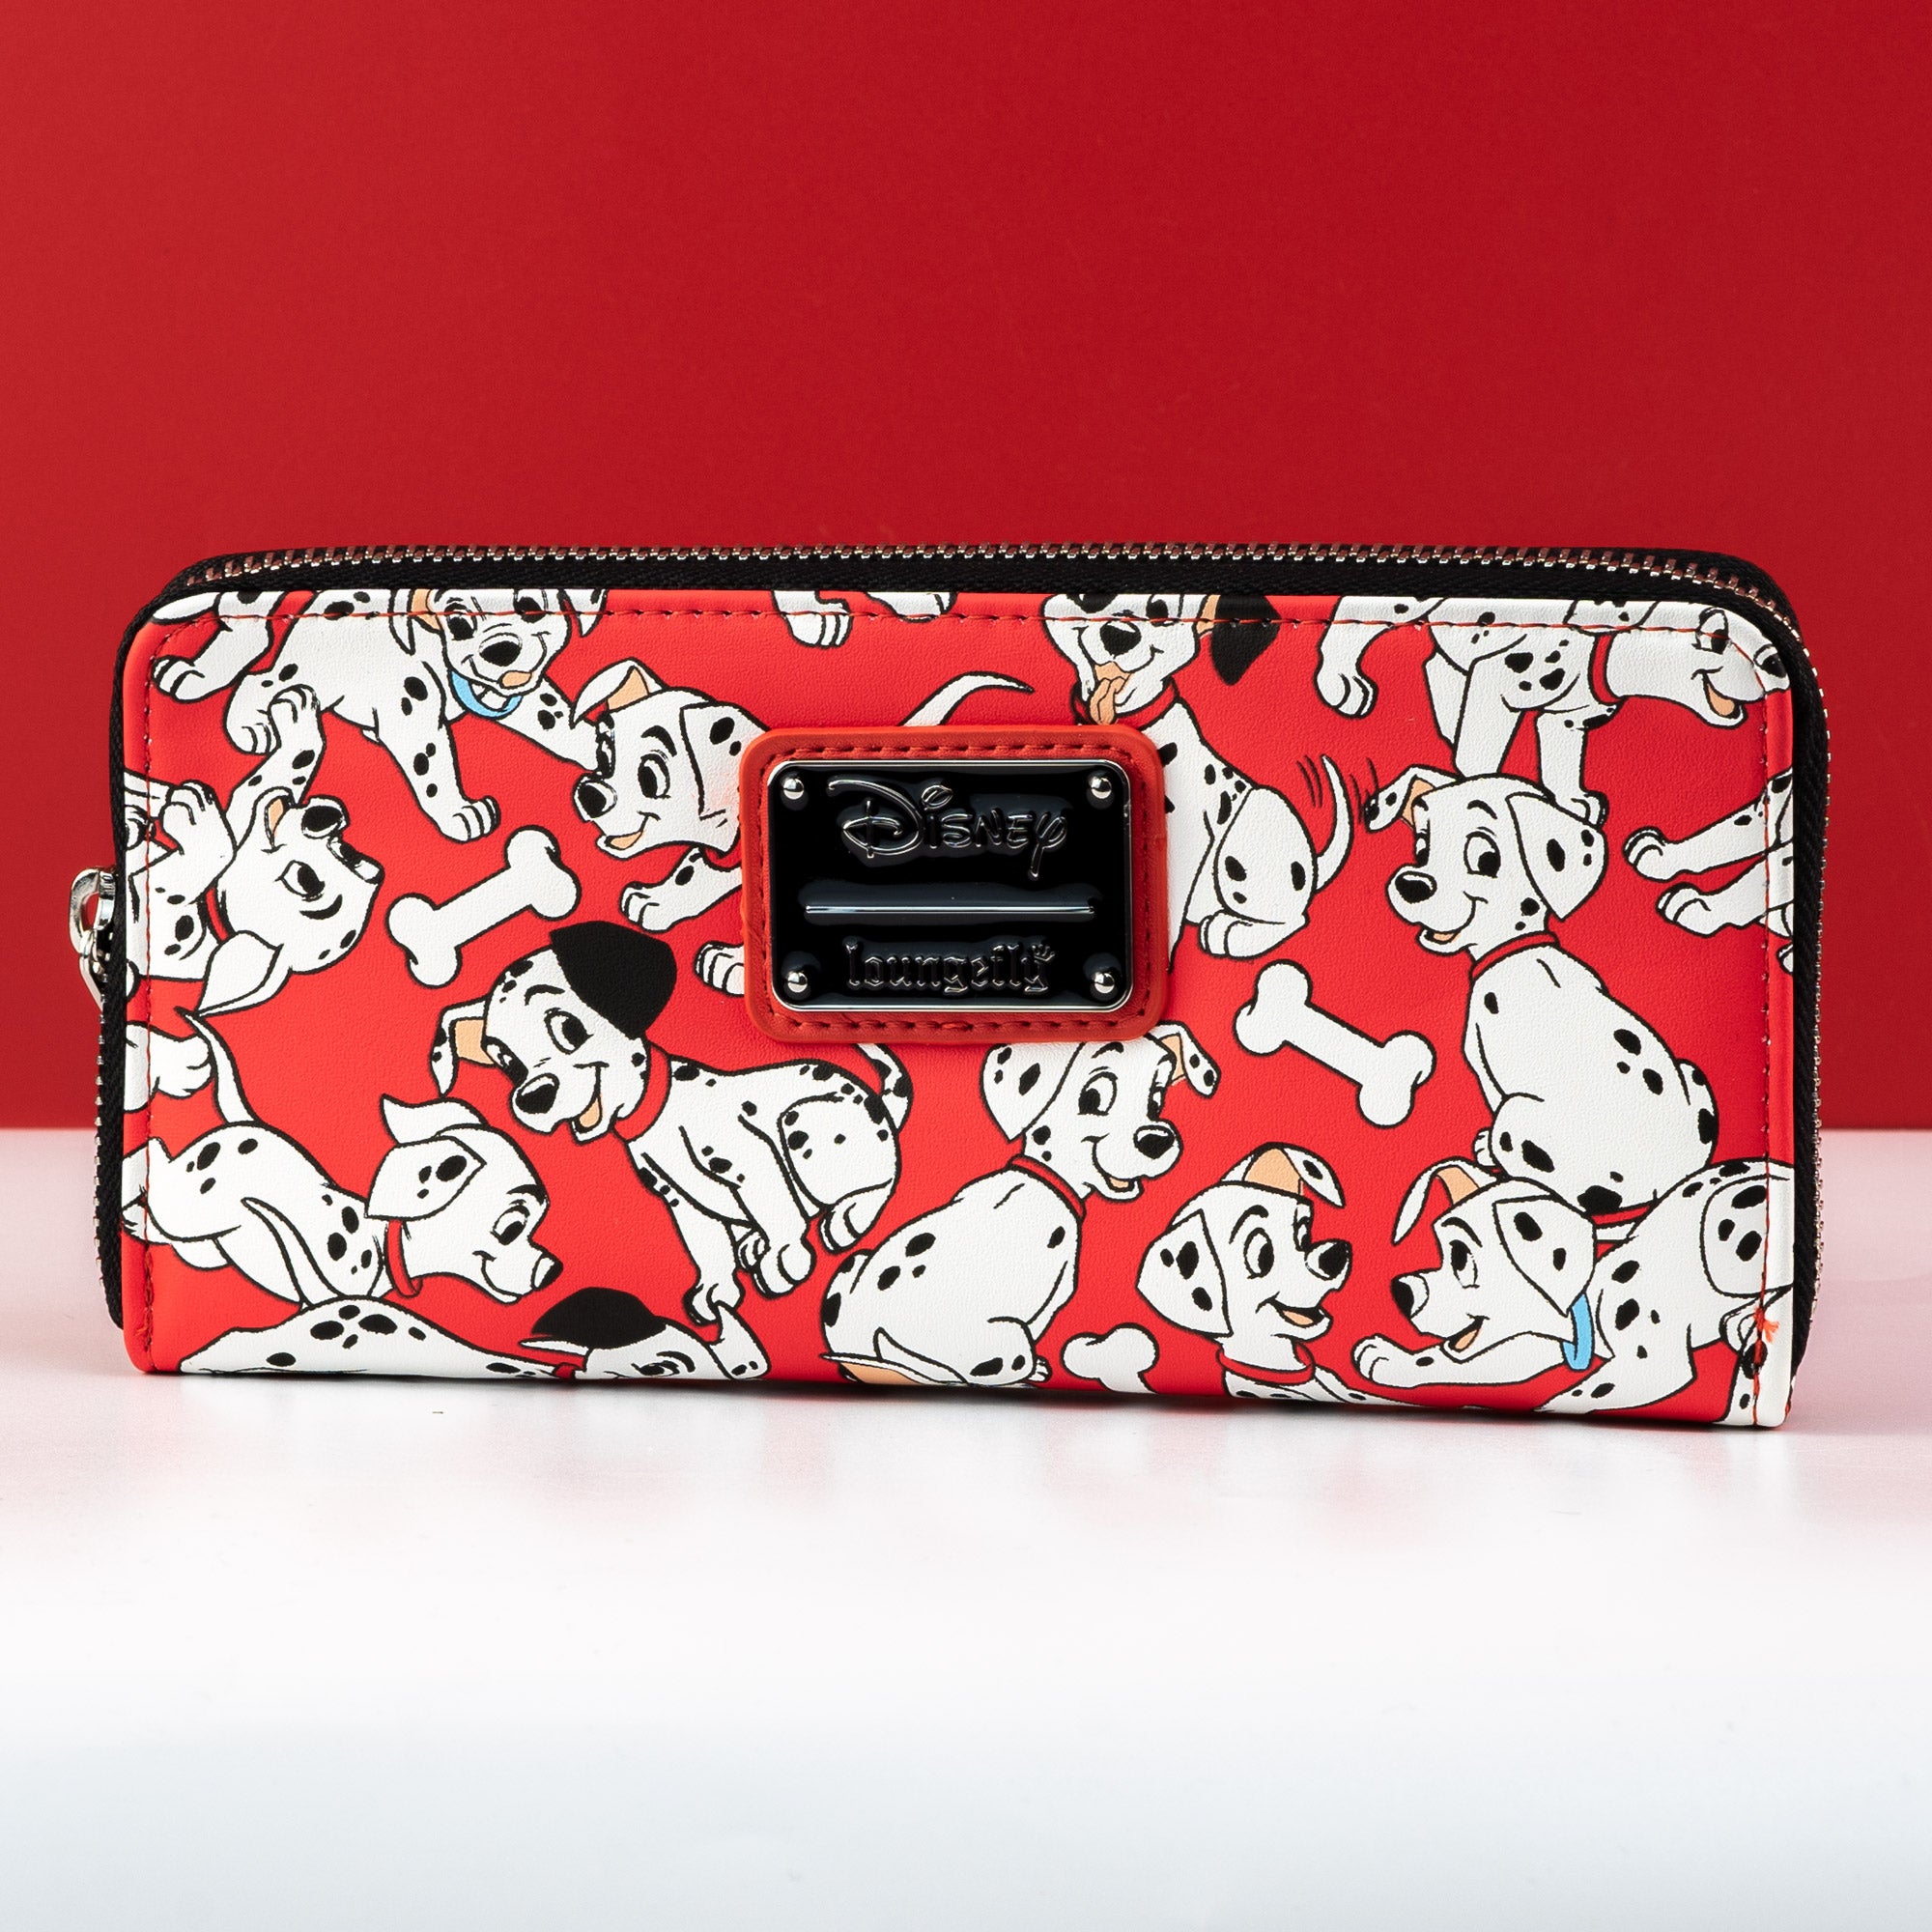 Loungefly x Disney 101 Dalmatians 60th Anniversary All Over Print Purse